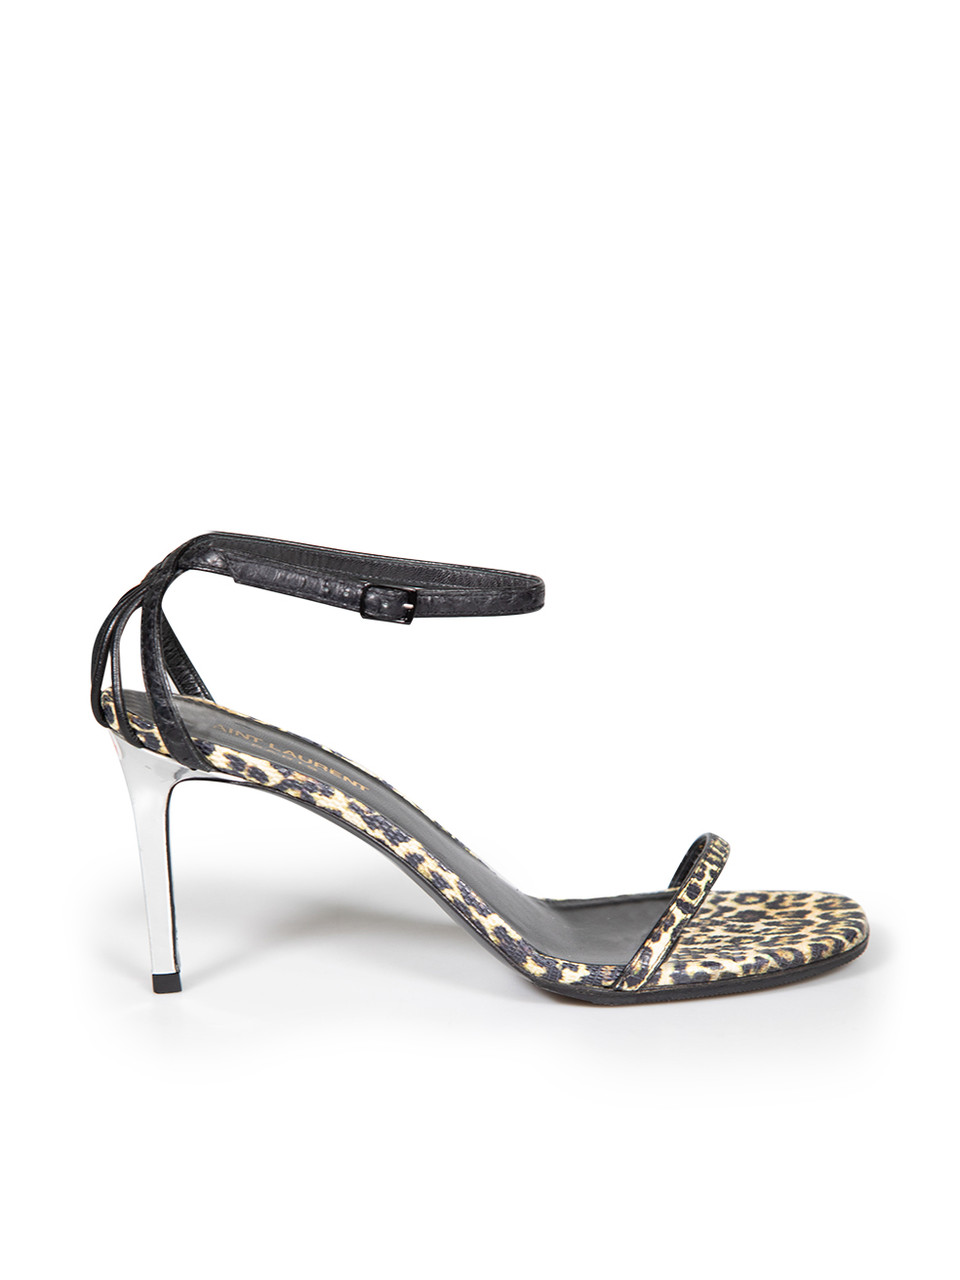 Image of Leopard Print Leather Strap Sandals